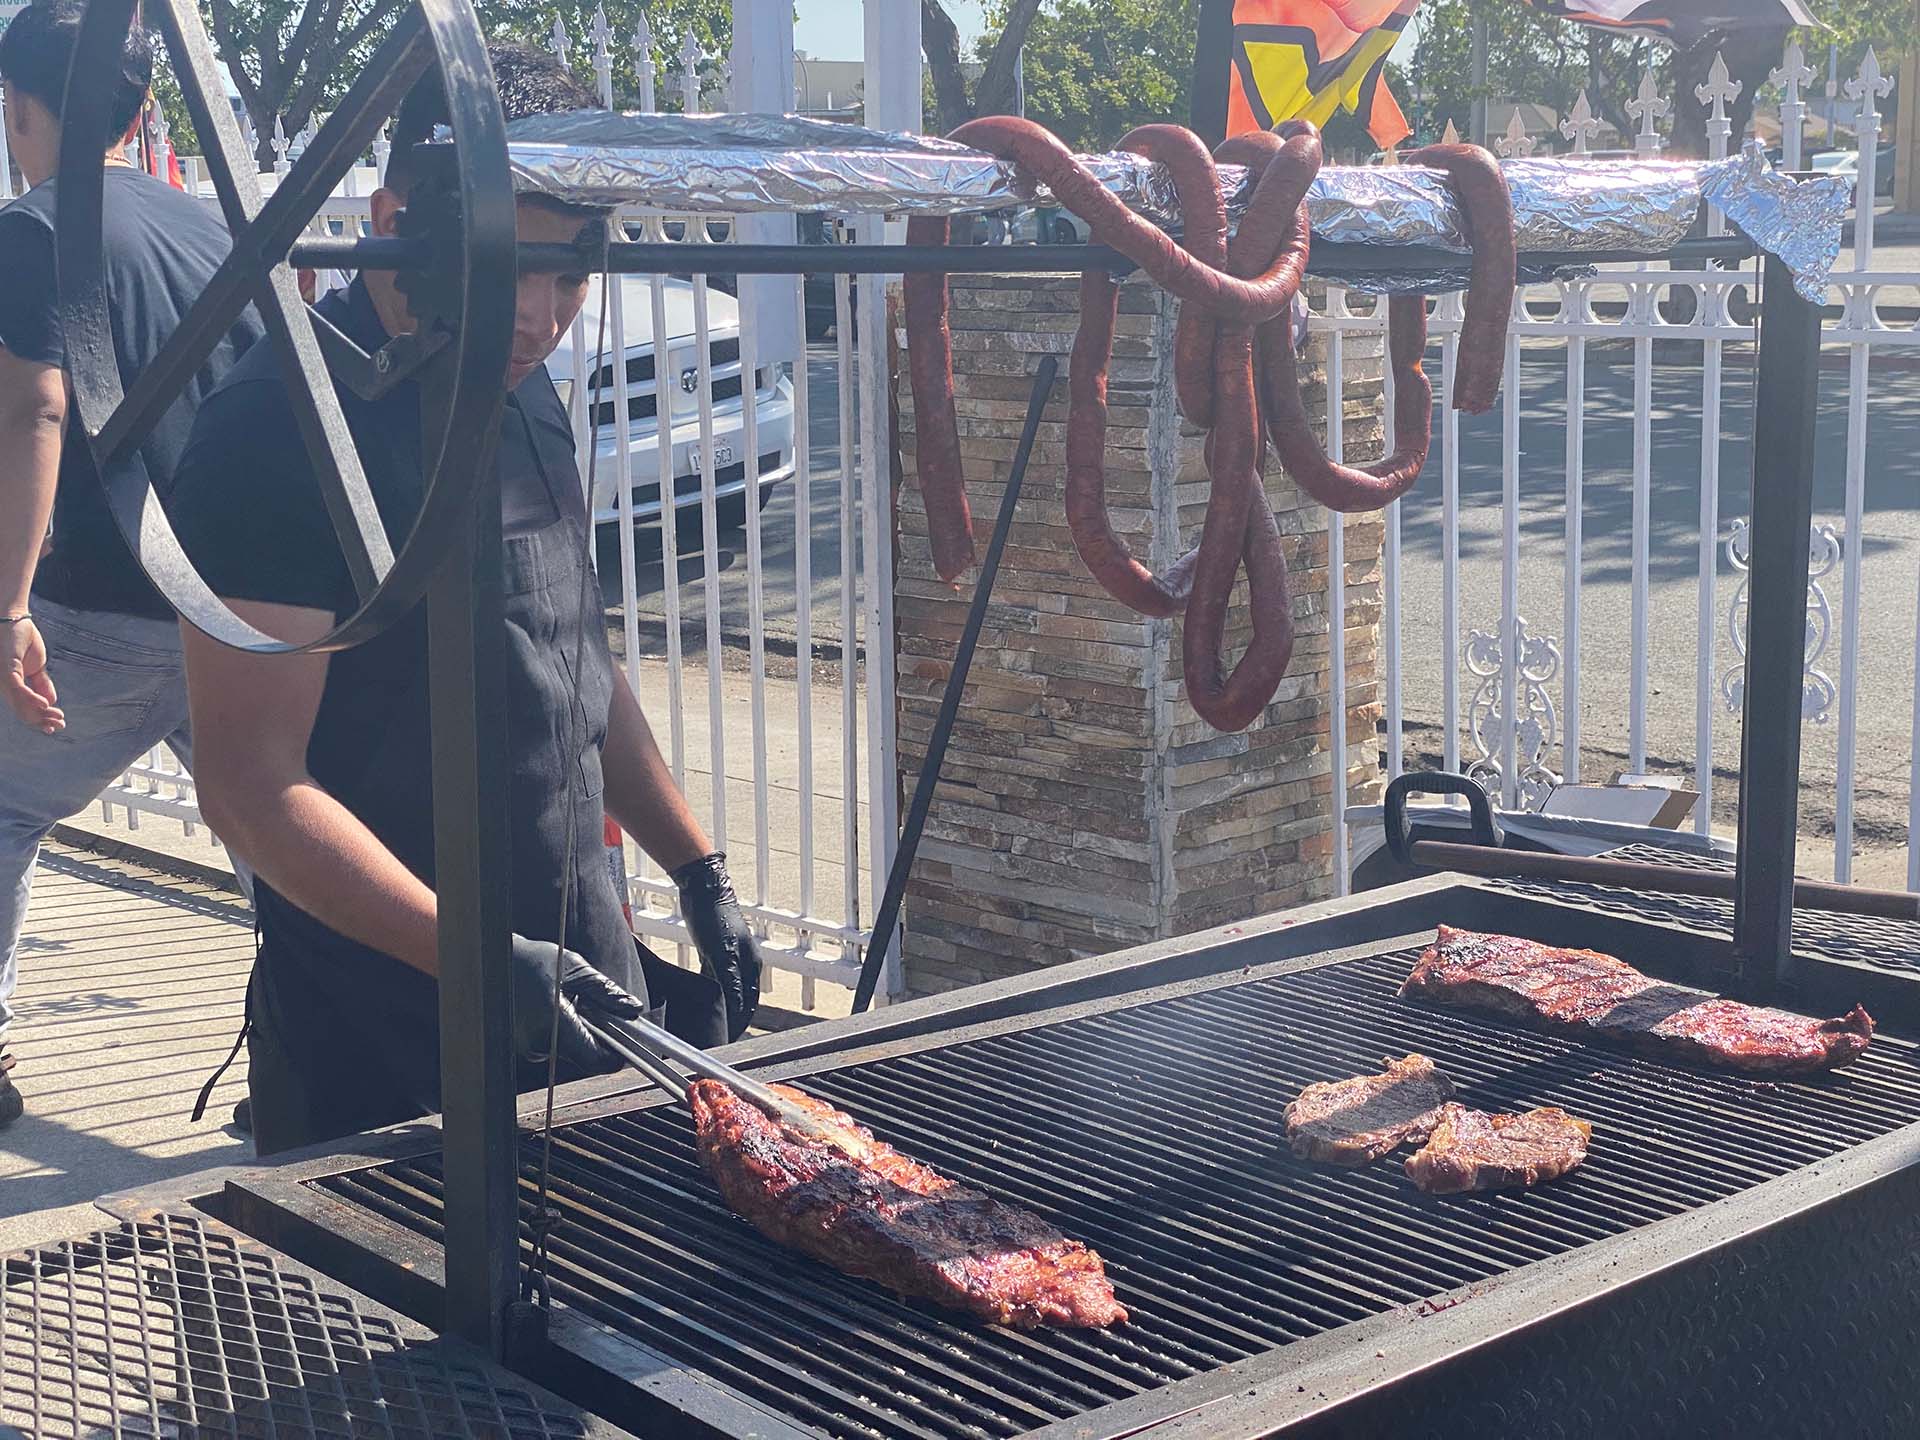 A man in black uses tongs to flip a rack of ribs cooking on the grill. A long chorizo sausage is coiled overhead on the frame of the grill.